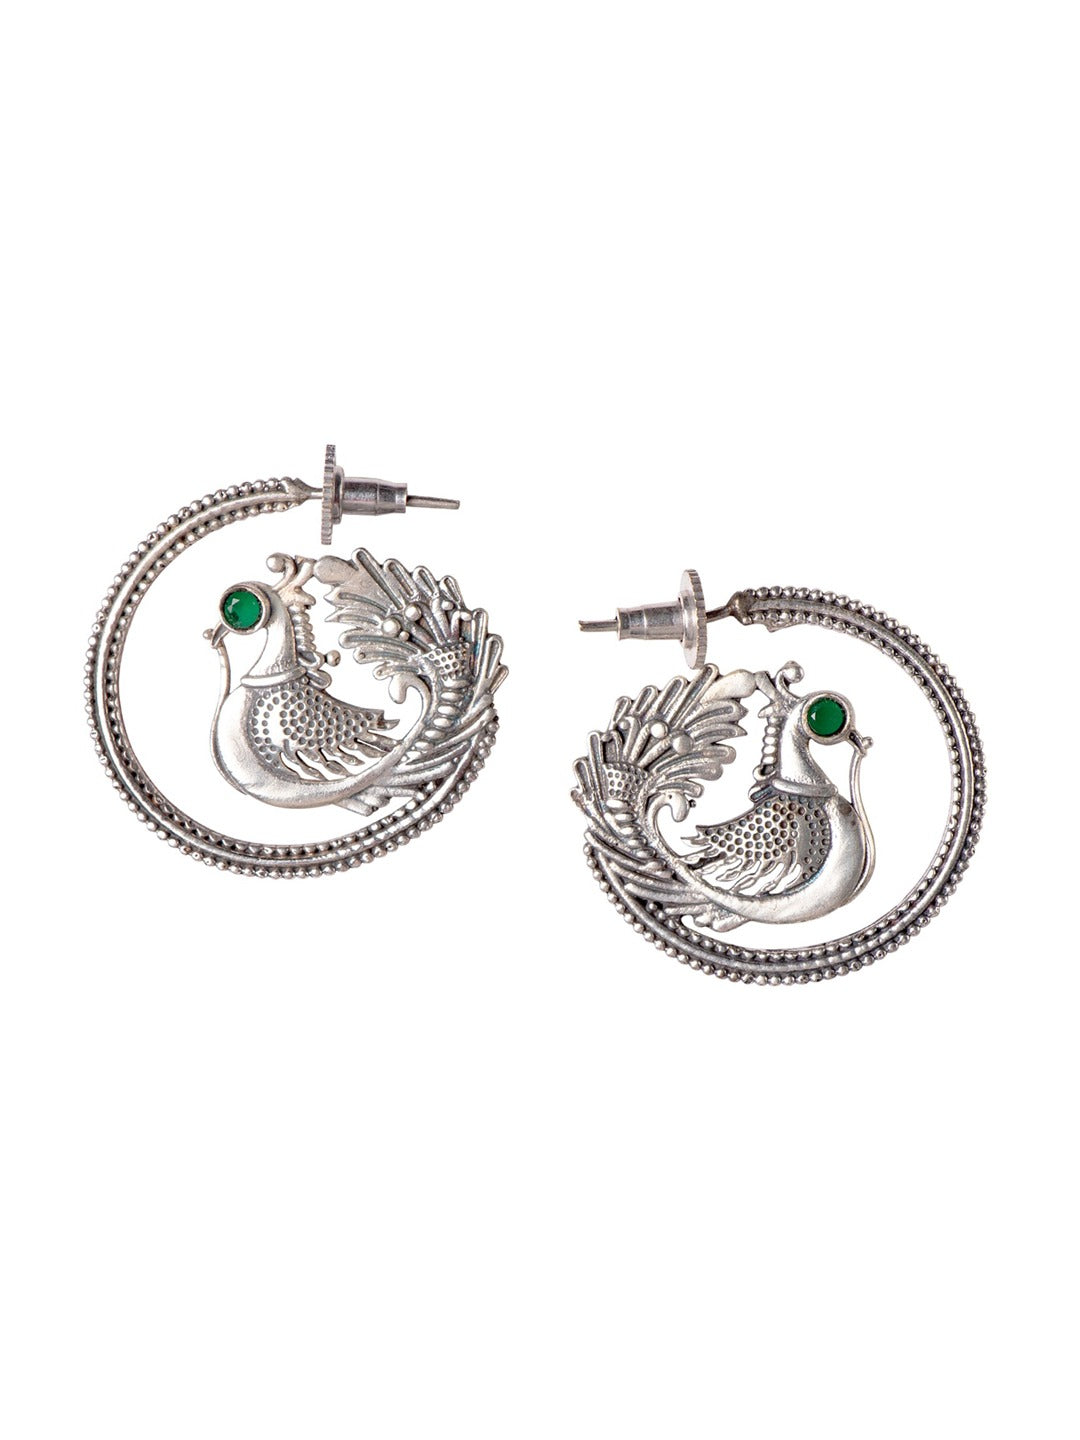 Women's Silver-Toned and Silver-Plated Contemporary Studs Earrings - Morkanth